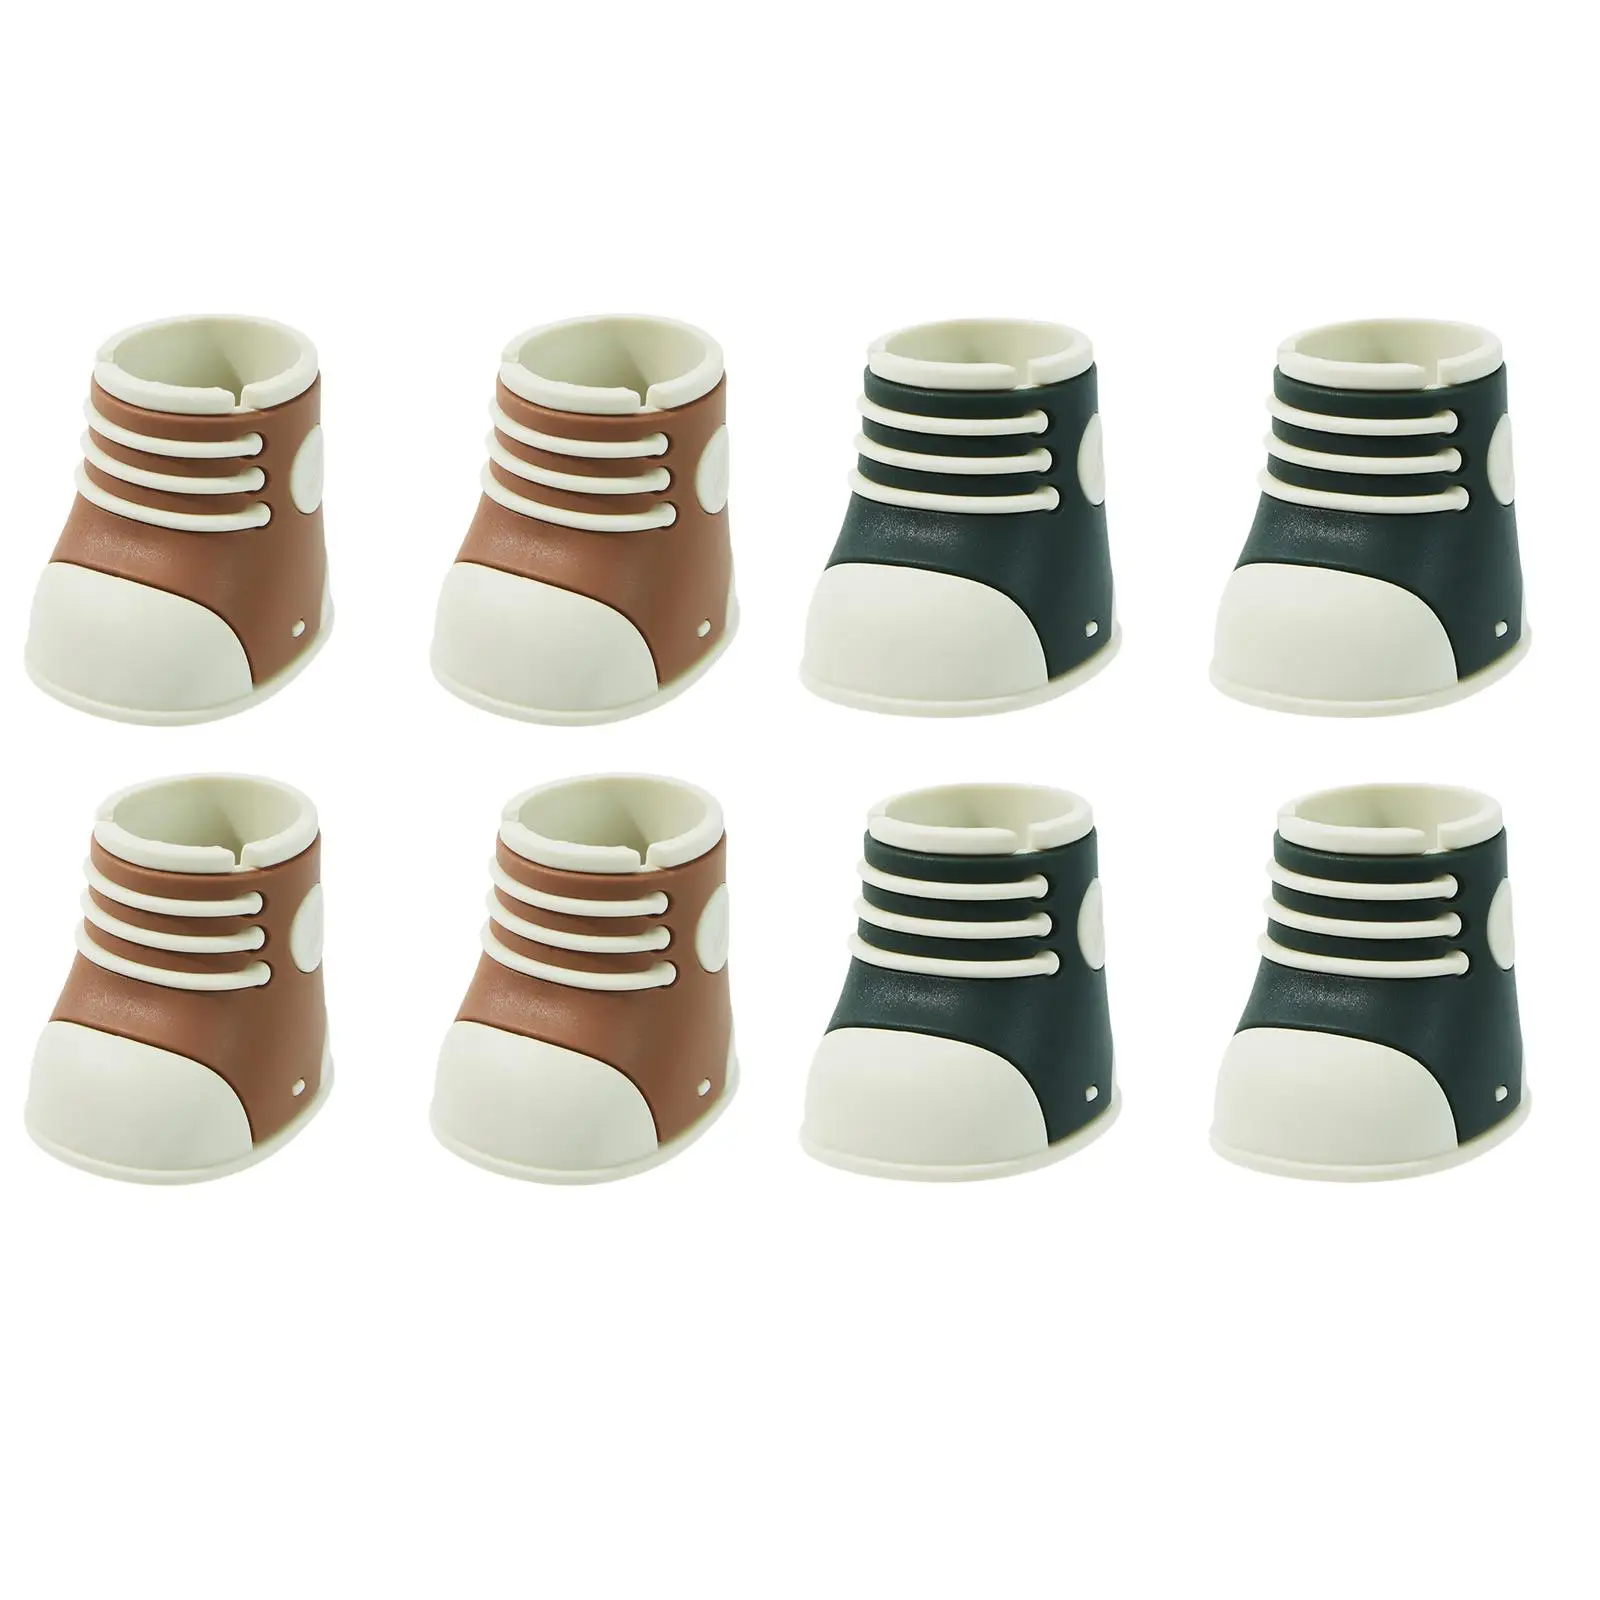 4Pcs Chair Leg Caps Covers Furniture Sliders Shoe Shaped Silicone Chair Leg Floor Protectors for Table Office Chair Couch